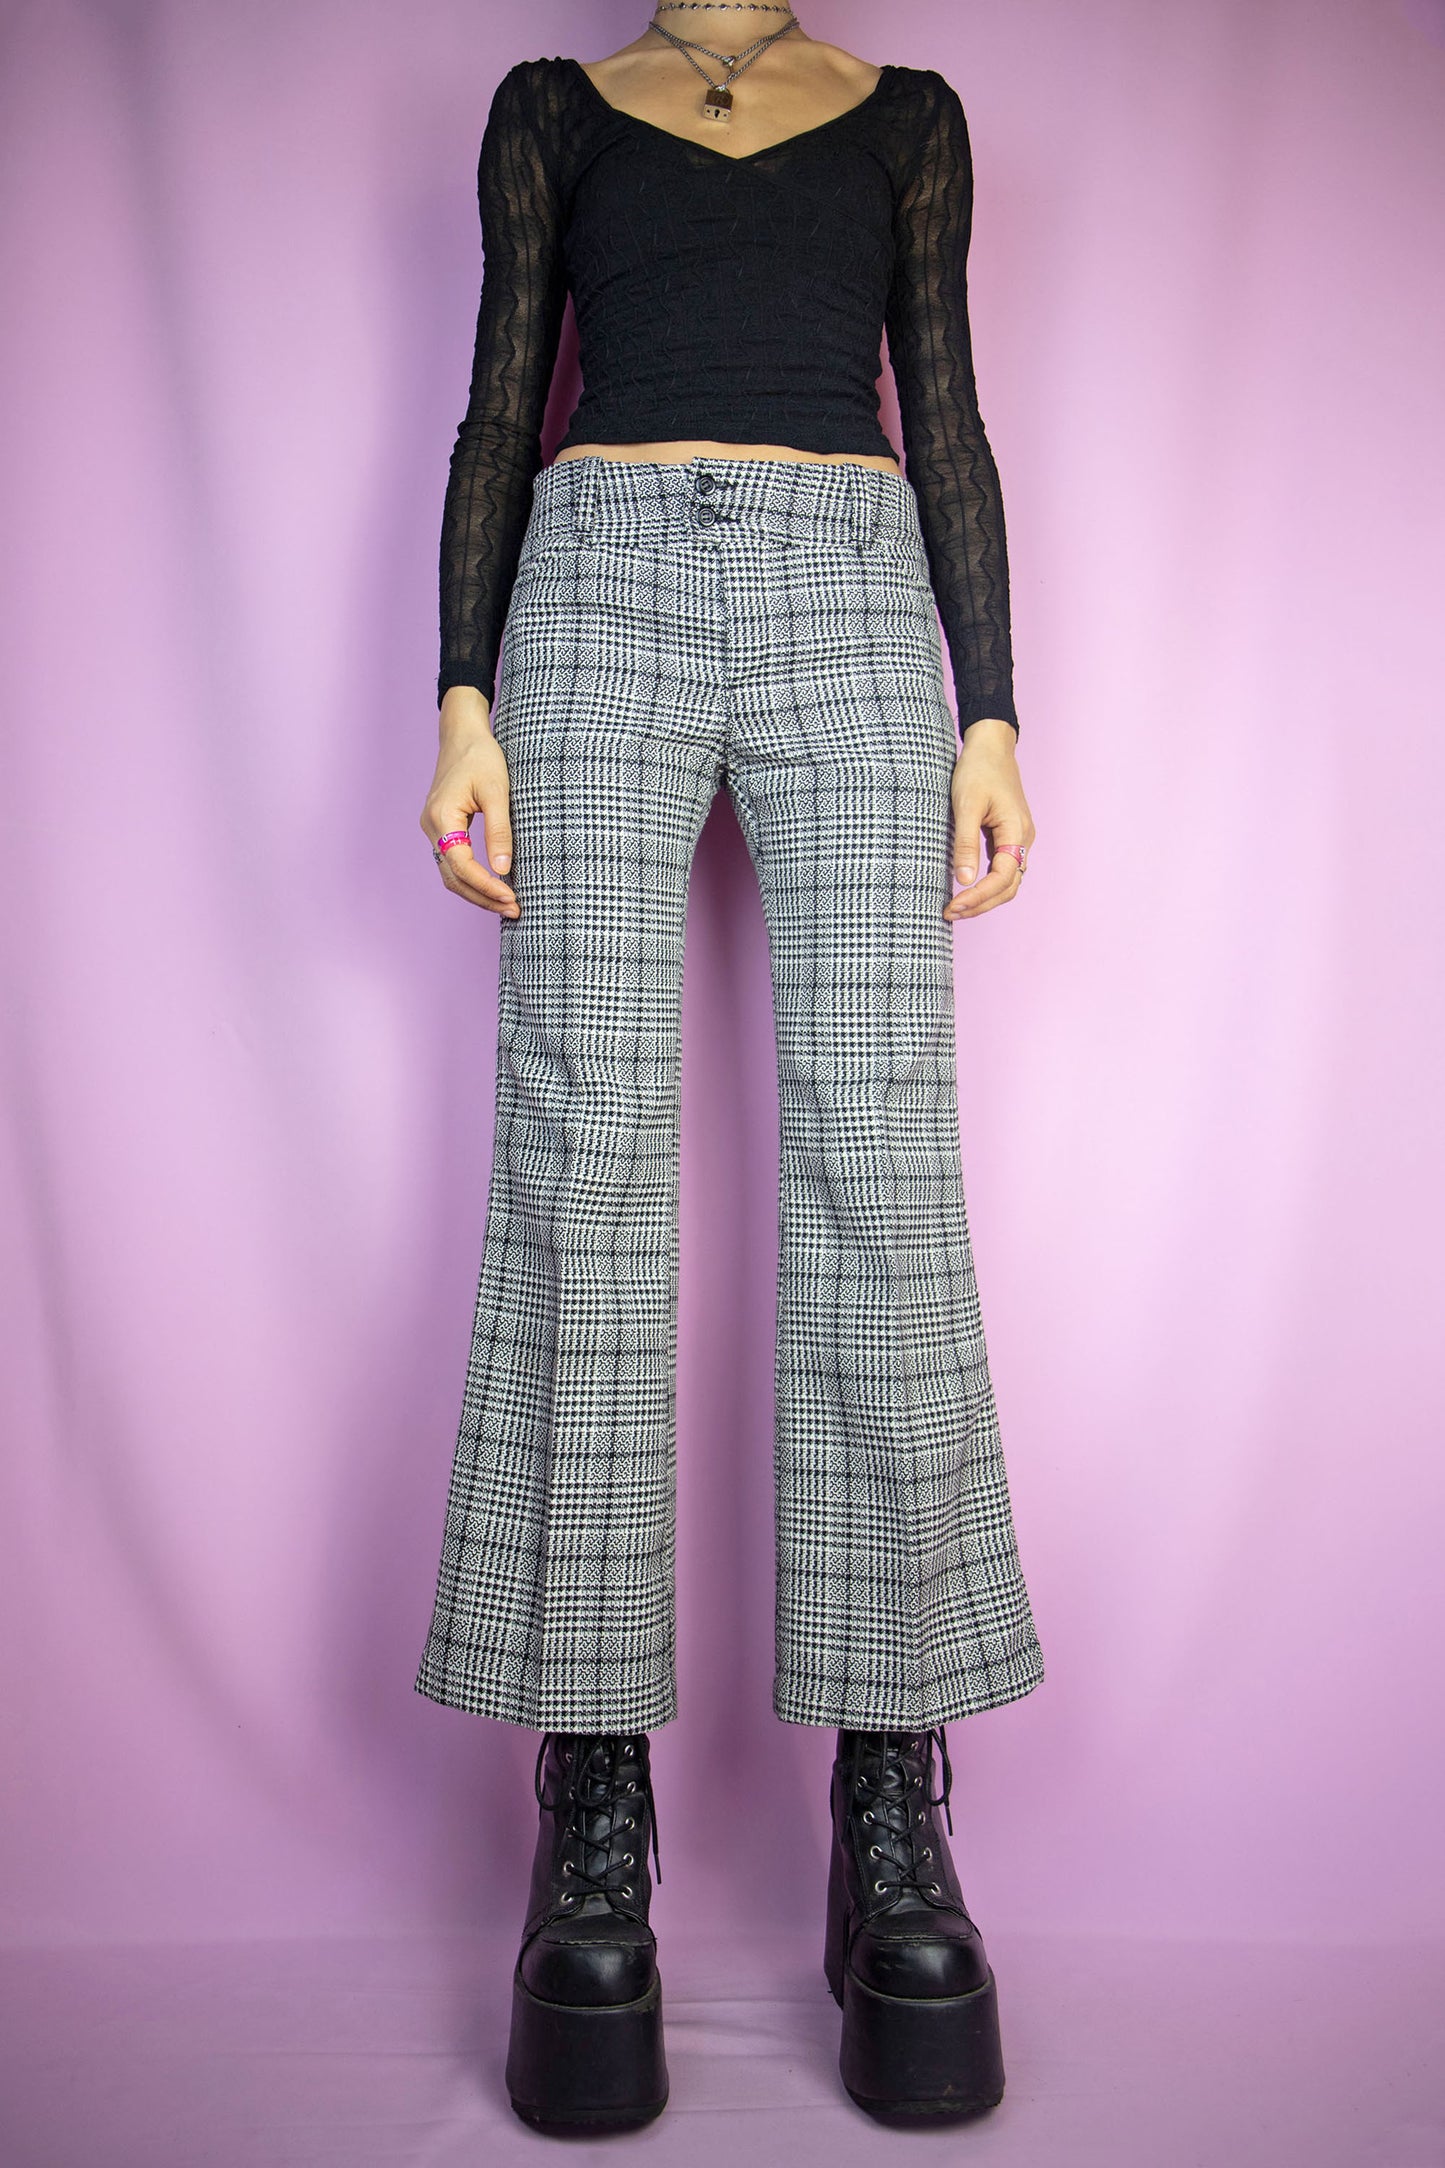 The Vintage 90s Plaid Flare Trousers are black and white checkered pattern pants with pockets, and a front zipper closure. Preppy office 1990s gingham knit tailored pants.